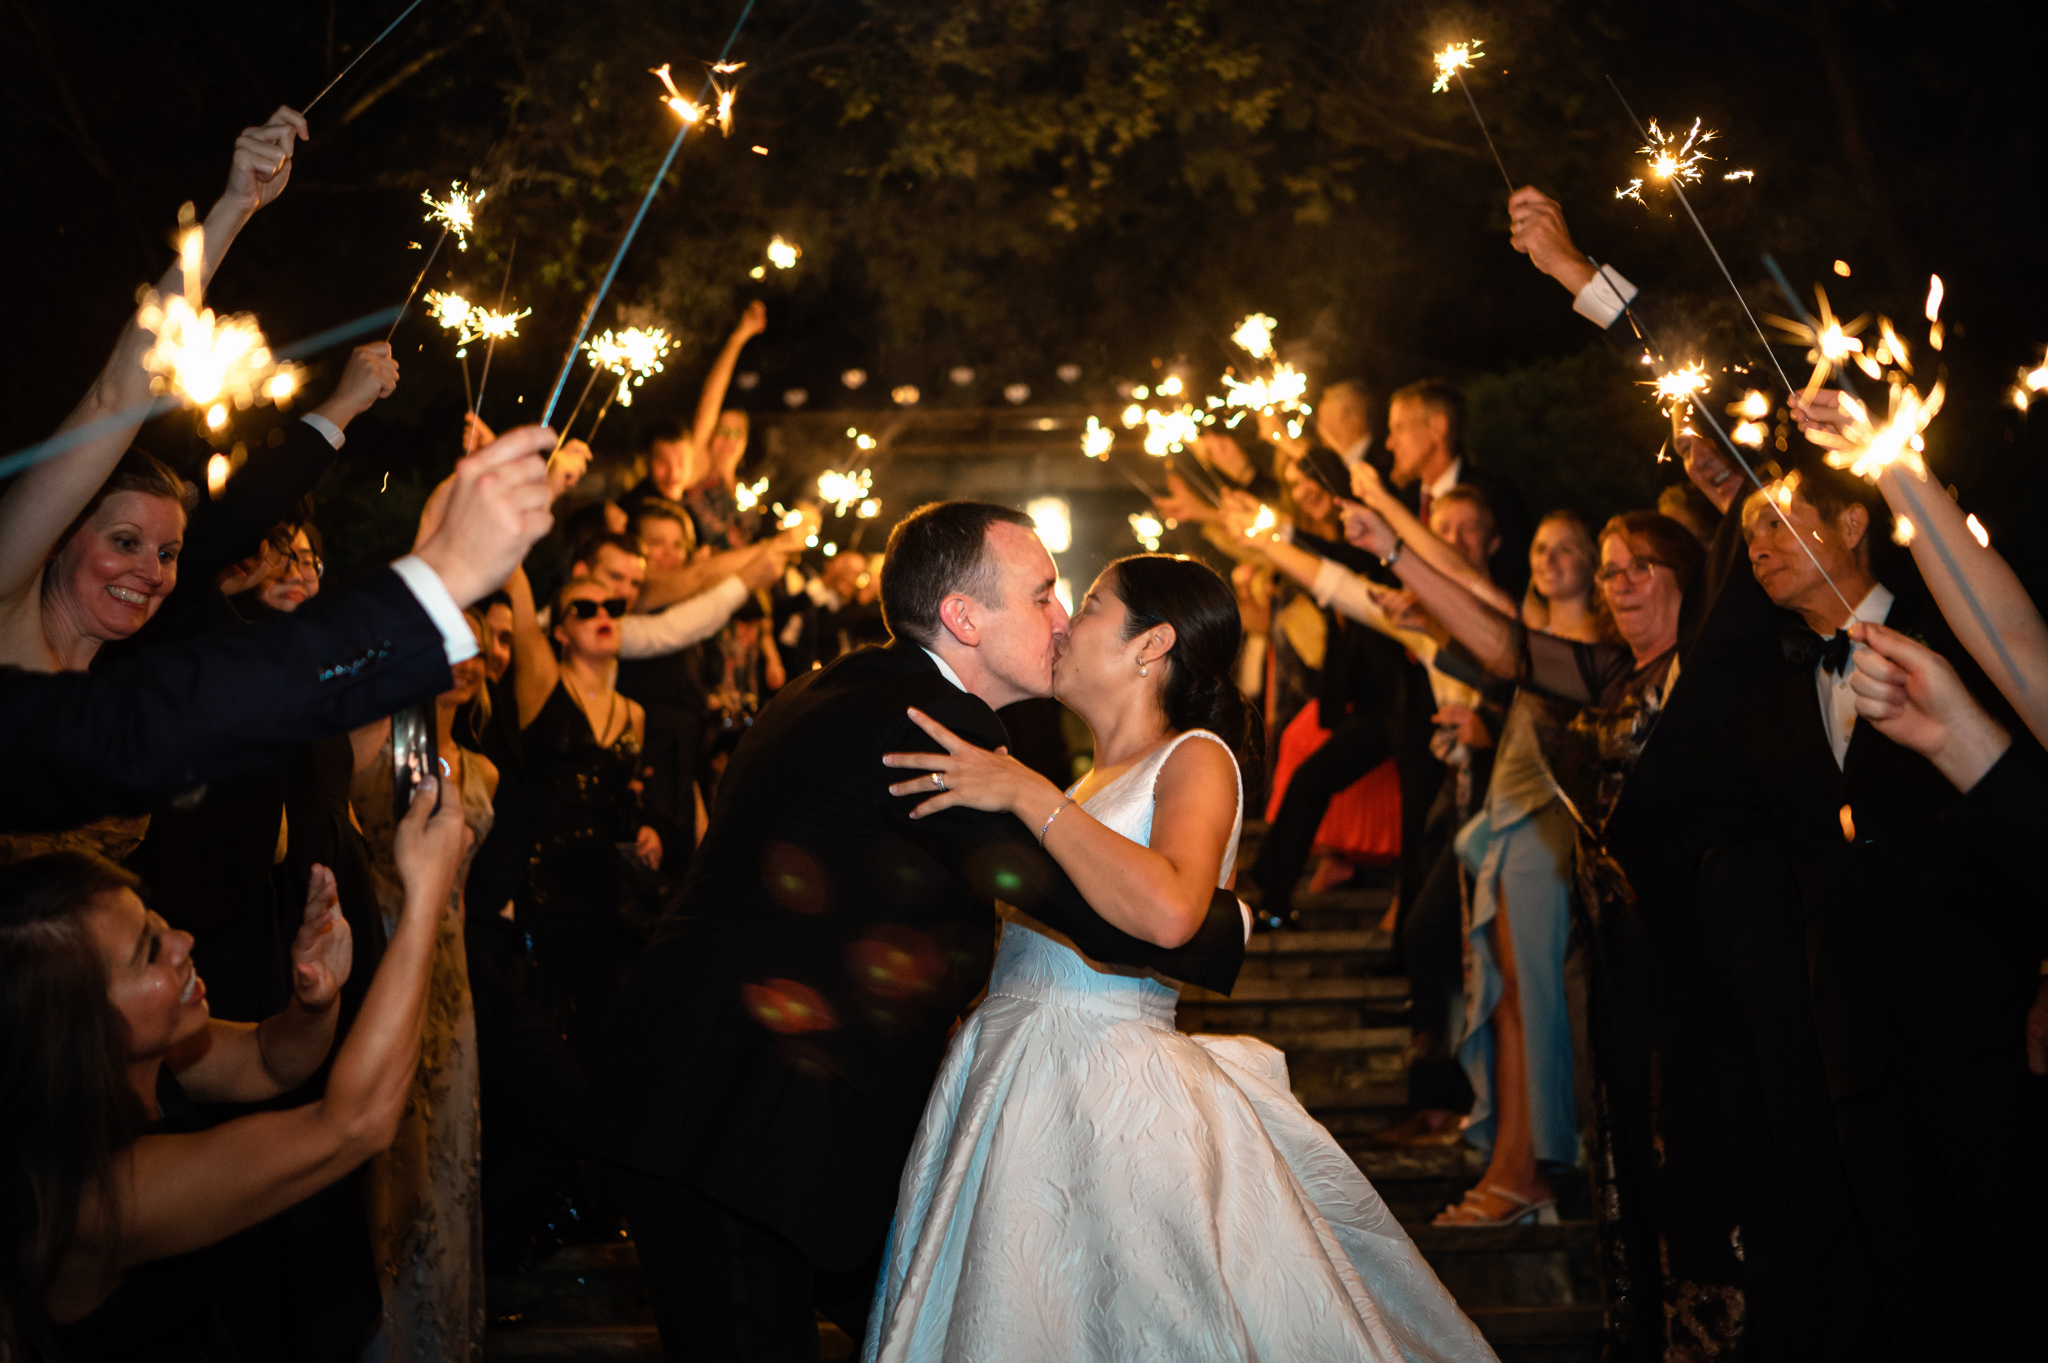 A bride and groom sharing a romantic kiss in front of sparklers at their farm wedding.